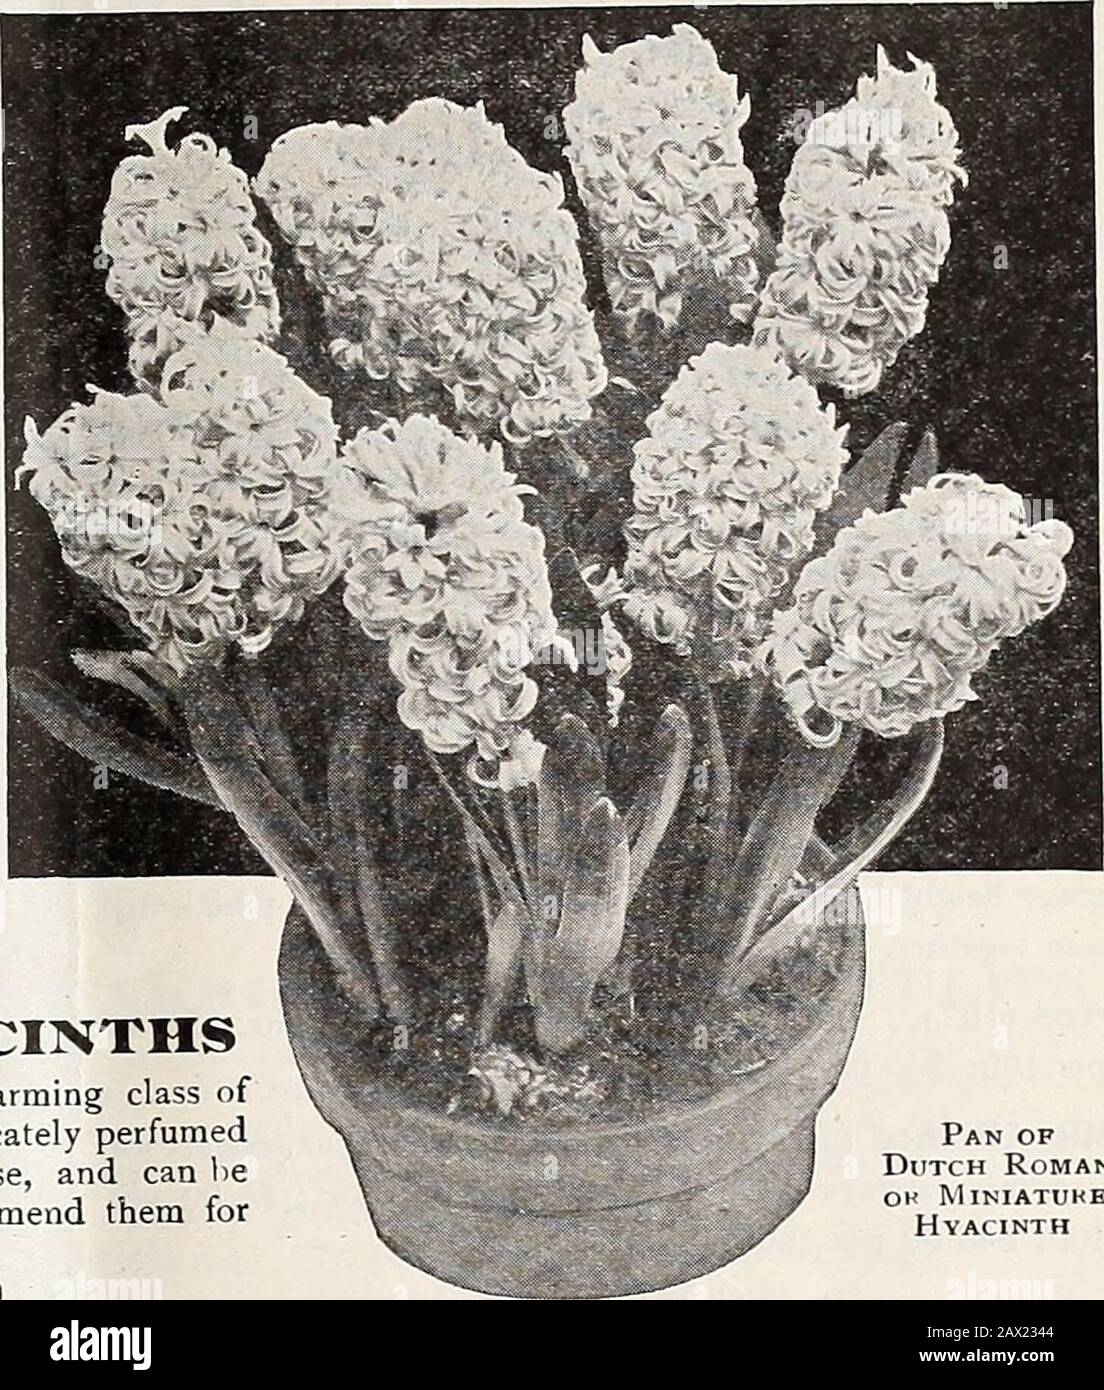 Dreer's autumn catalogue 1920 . We do not recommend them for. DUTCH ROMAN ORMINIATURE HYACINTHS These are small bulbs of the single-flowering Dutch Hya-cinths, and quite distinct from the French Romans, andexcellent for growing in pans, pots or boxes, in soil or pre-pared fibre, blooming early and freely. They may beplanted close together in the pans, pots or boxes, or in bedsin the open ground, with charming effect. The bulbs weoffer average 5 inches in circumference, and must not be con-founded with smaller unnamed sorts. Gertrude. Deep rose.Qigantea. Soft blush or shell pink.La Victoire. Br Stock Photo